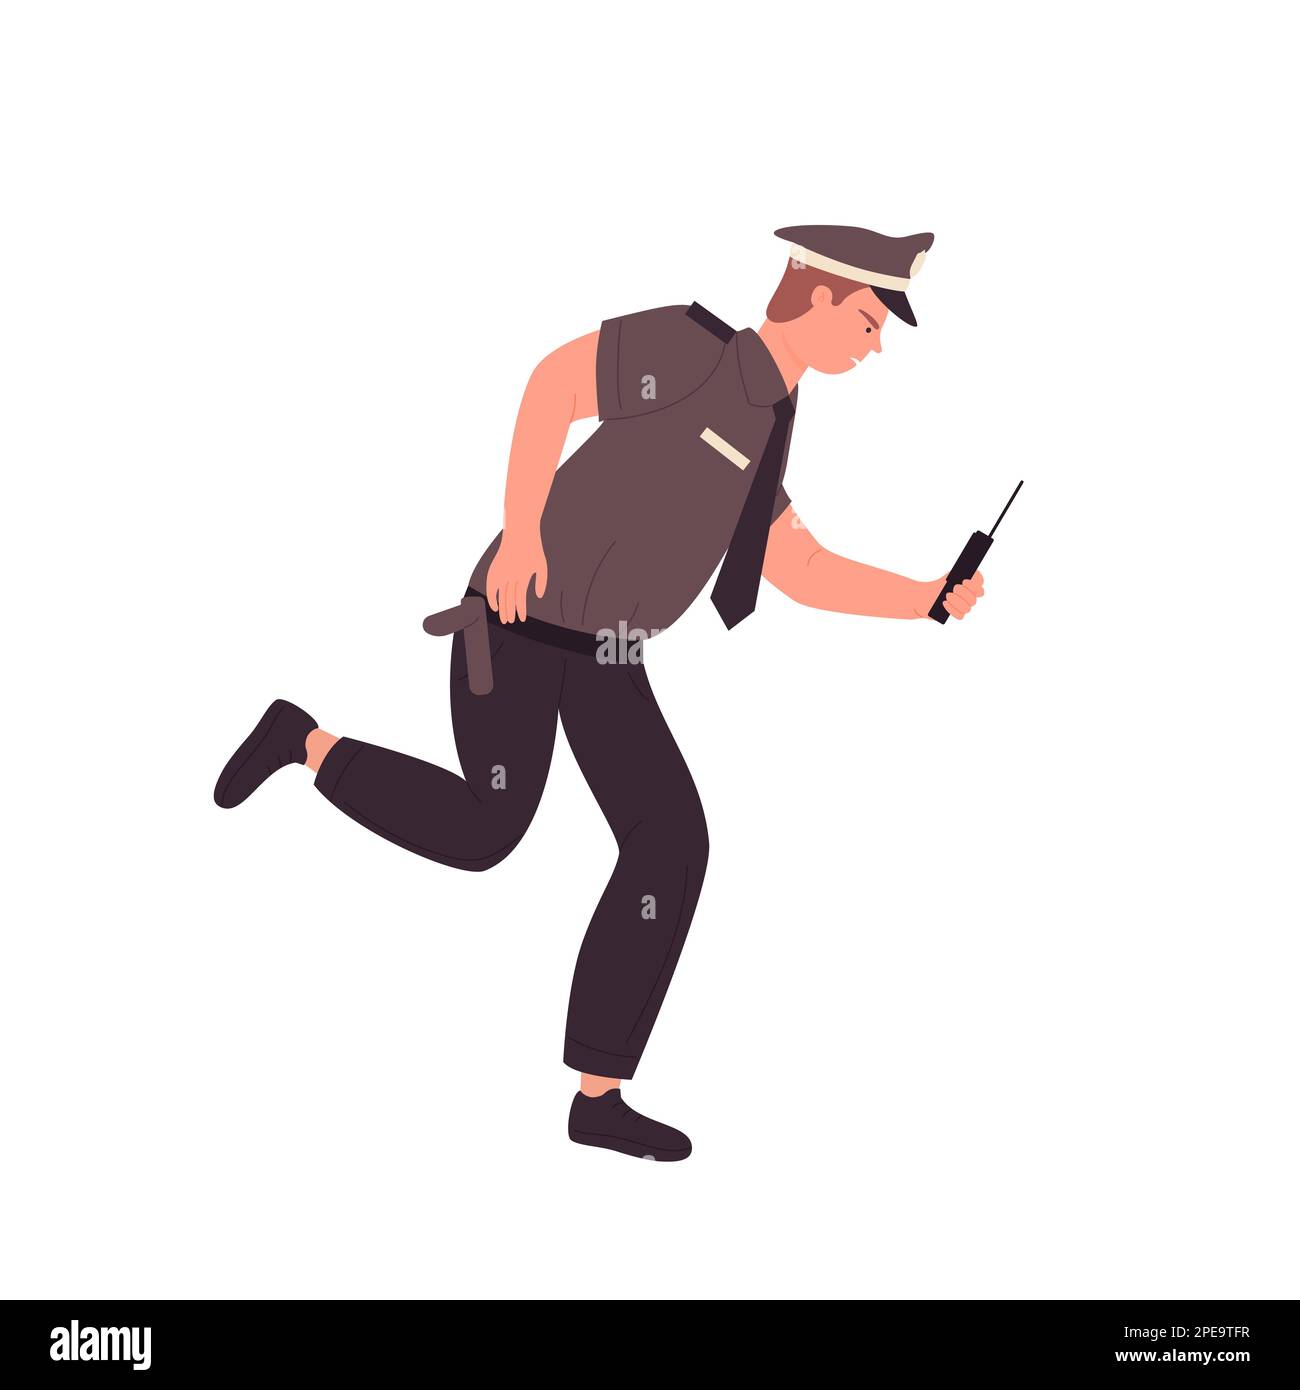 Angry policeman running. Police officer in chasing pose vector illustration Stock Vector